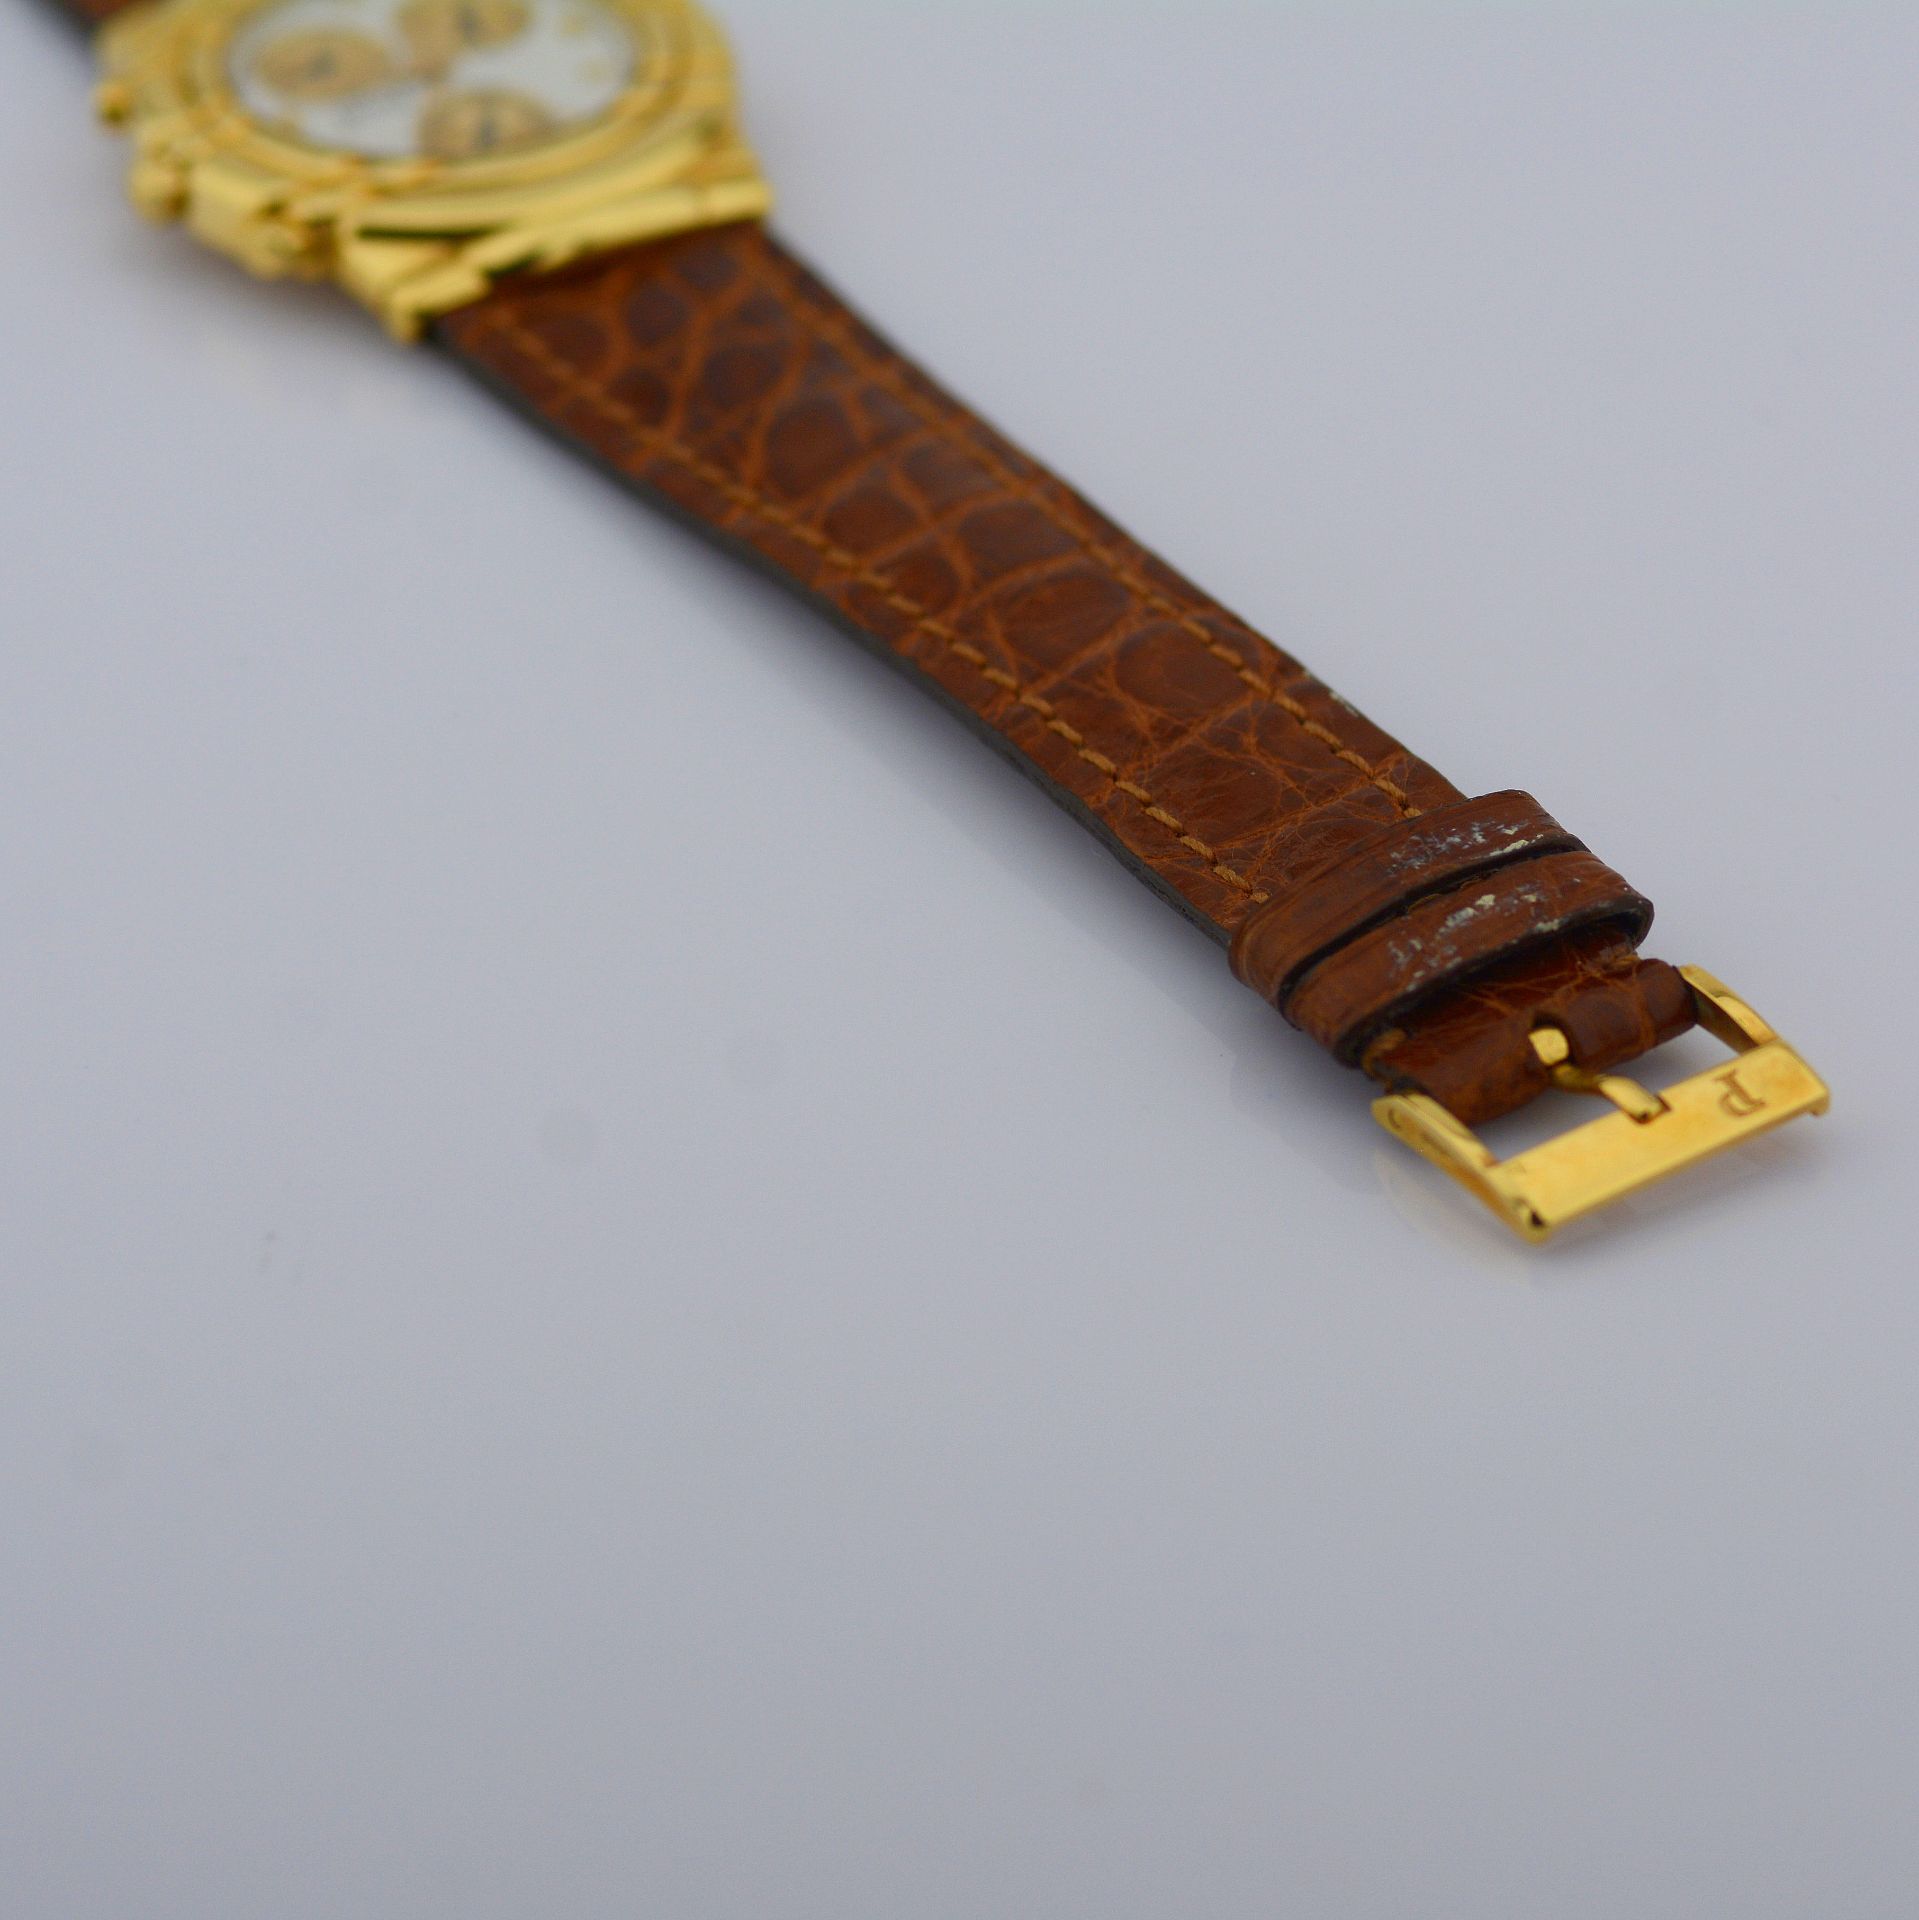 Piaget / Tanagra Chronograph - Lady's Yellow gold Wrist Watch - Image 13 of 15